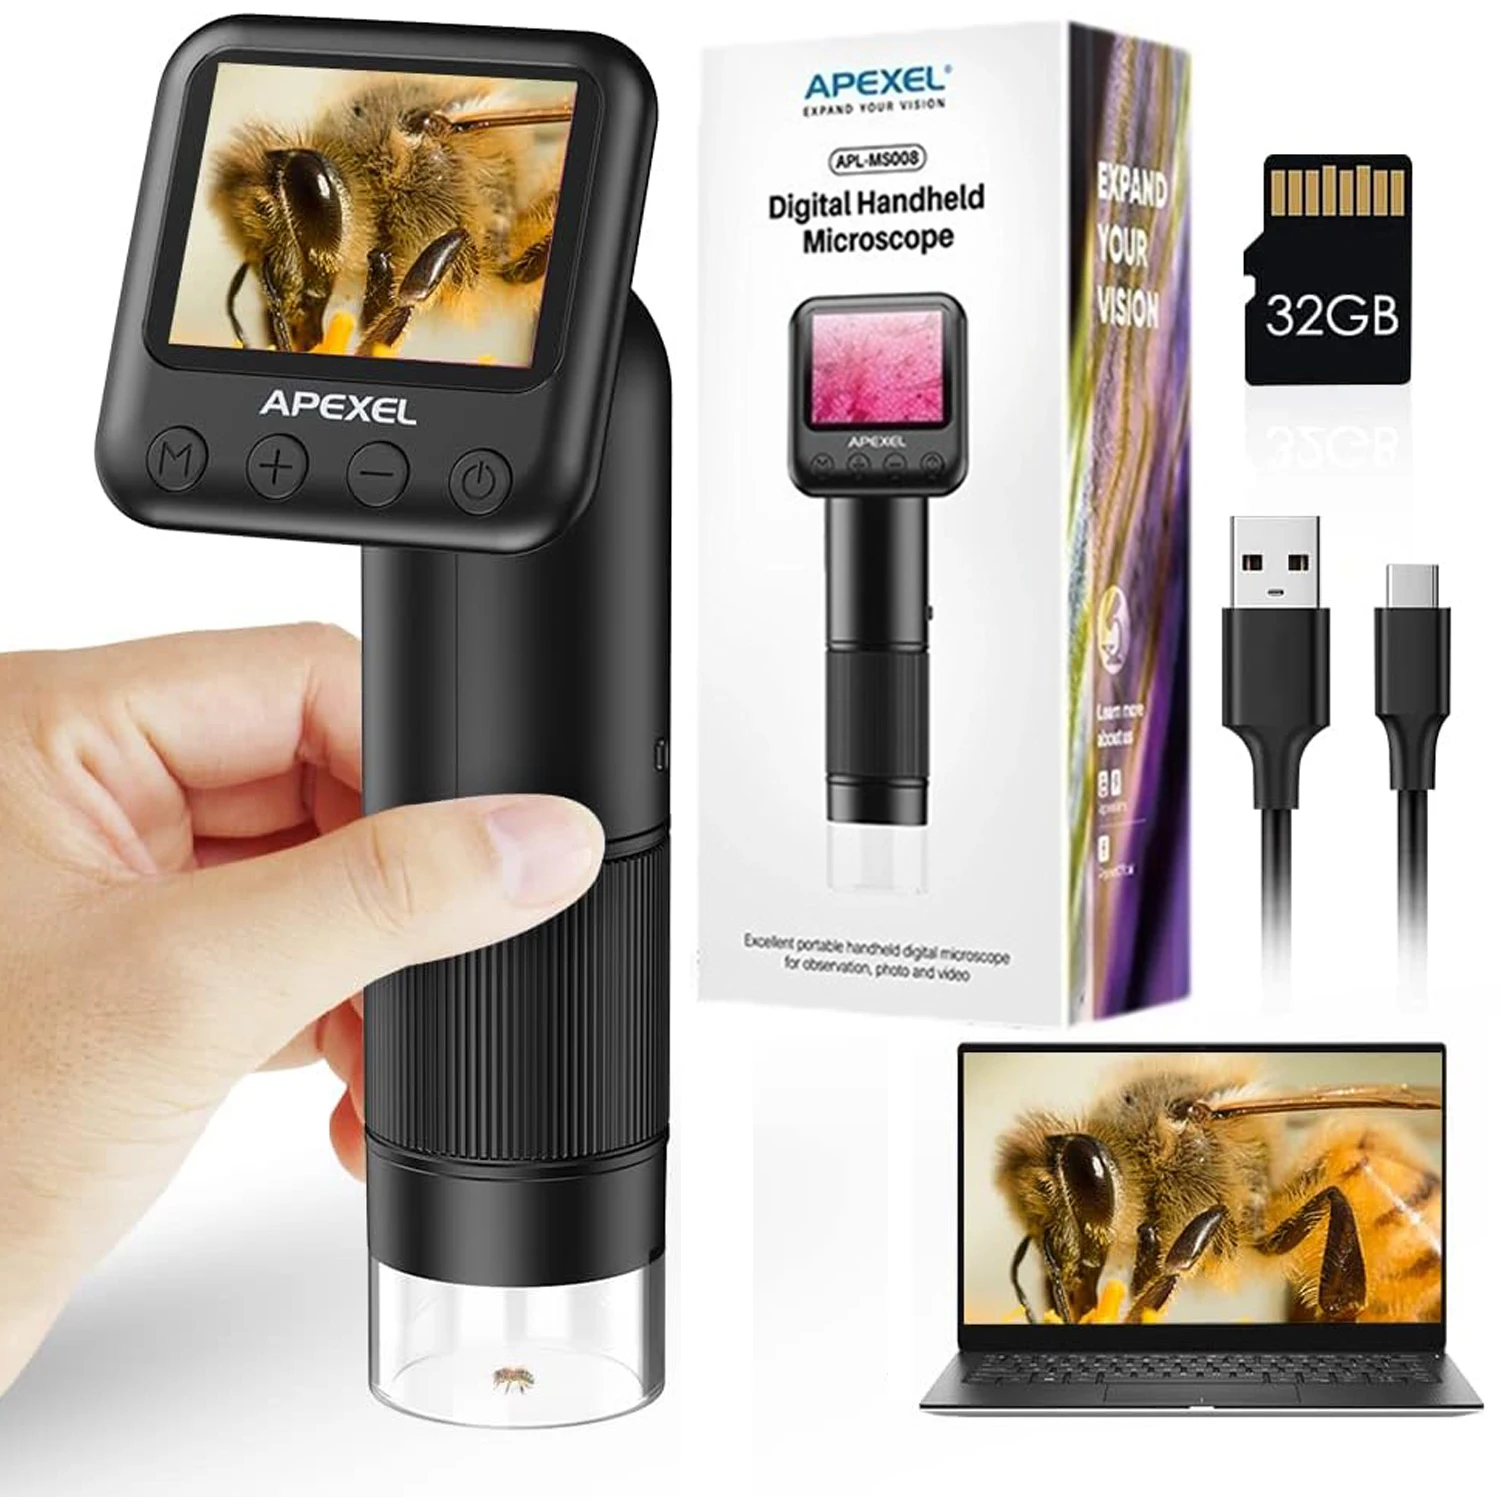 APEXEL APL-MS008 Handheld Digital Microscope 12X-24X Magnification Portable  Microscope for 2.0 Inch LCD Screen 2MP Photo 720P Video Built-in Battery